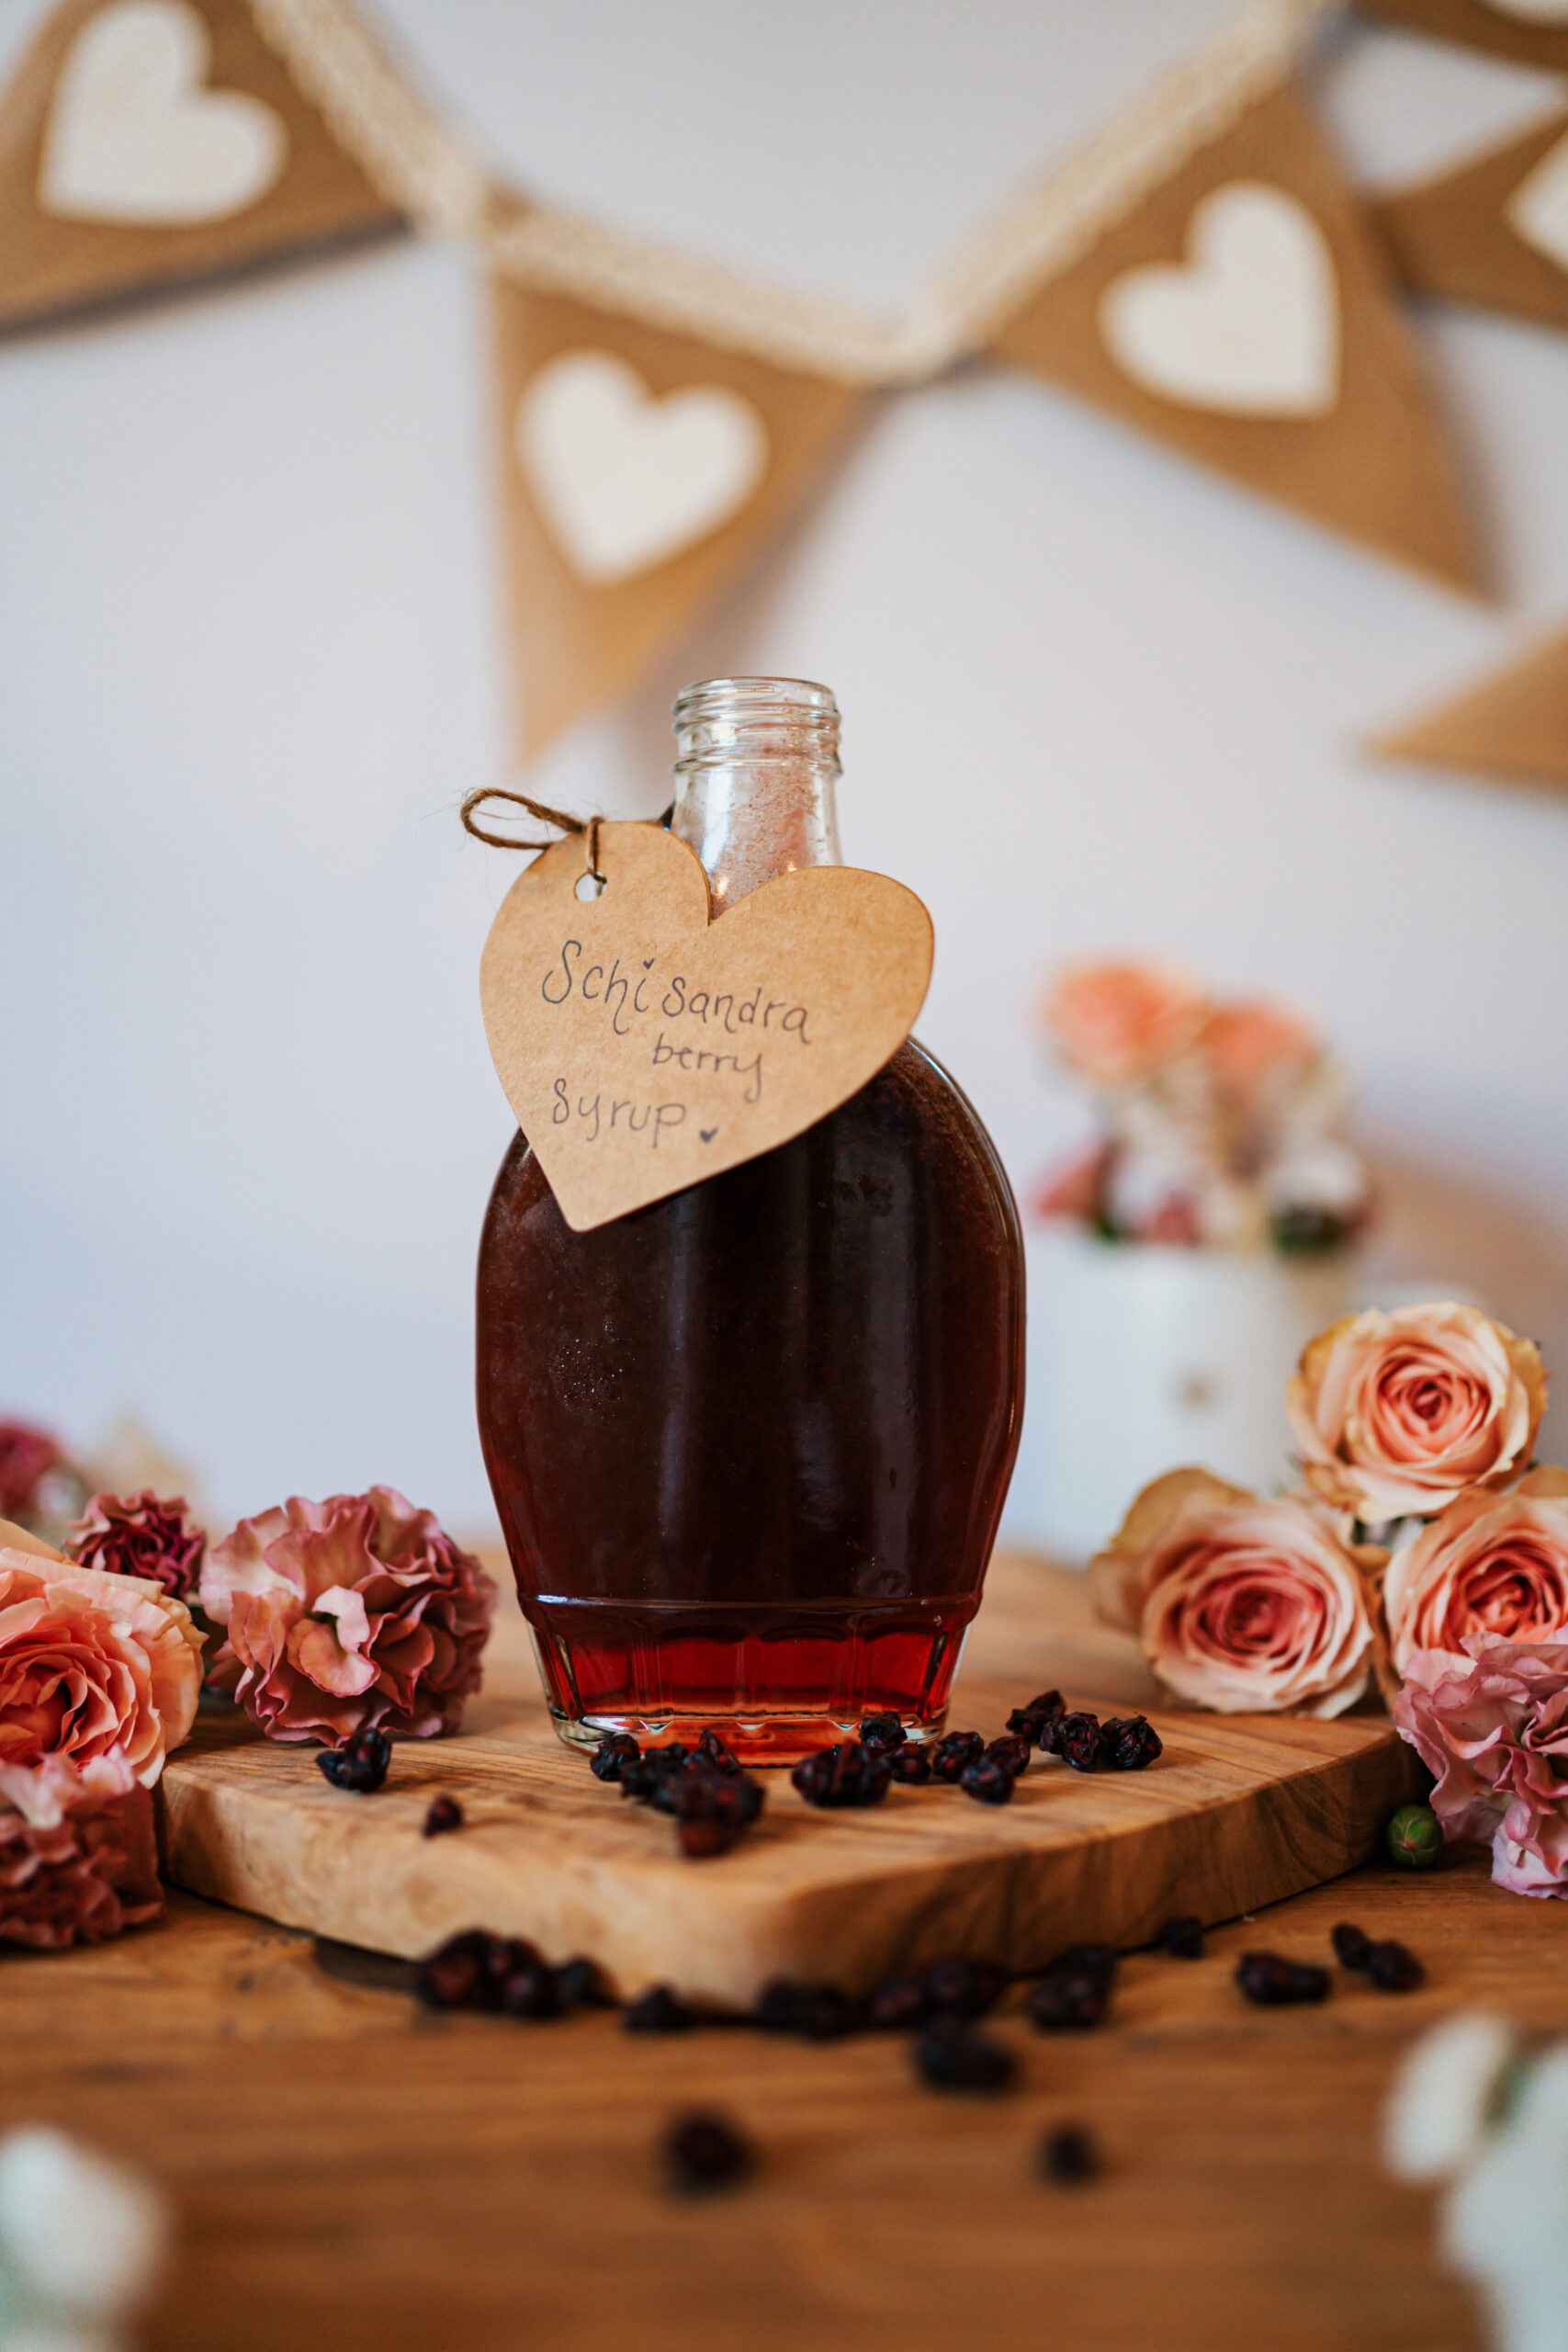 schisandra berry syrup in a glass bottle sitting on a wooden board with roses and a Valentine's Day banner hanging in the background